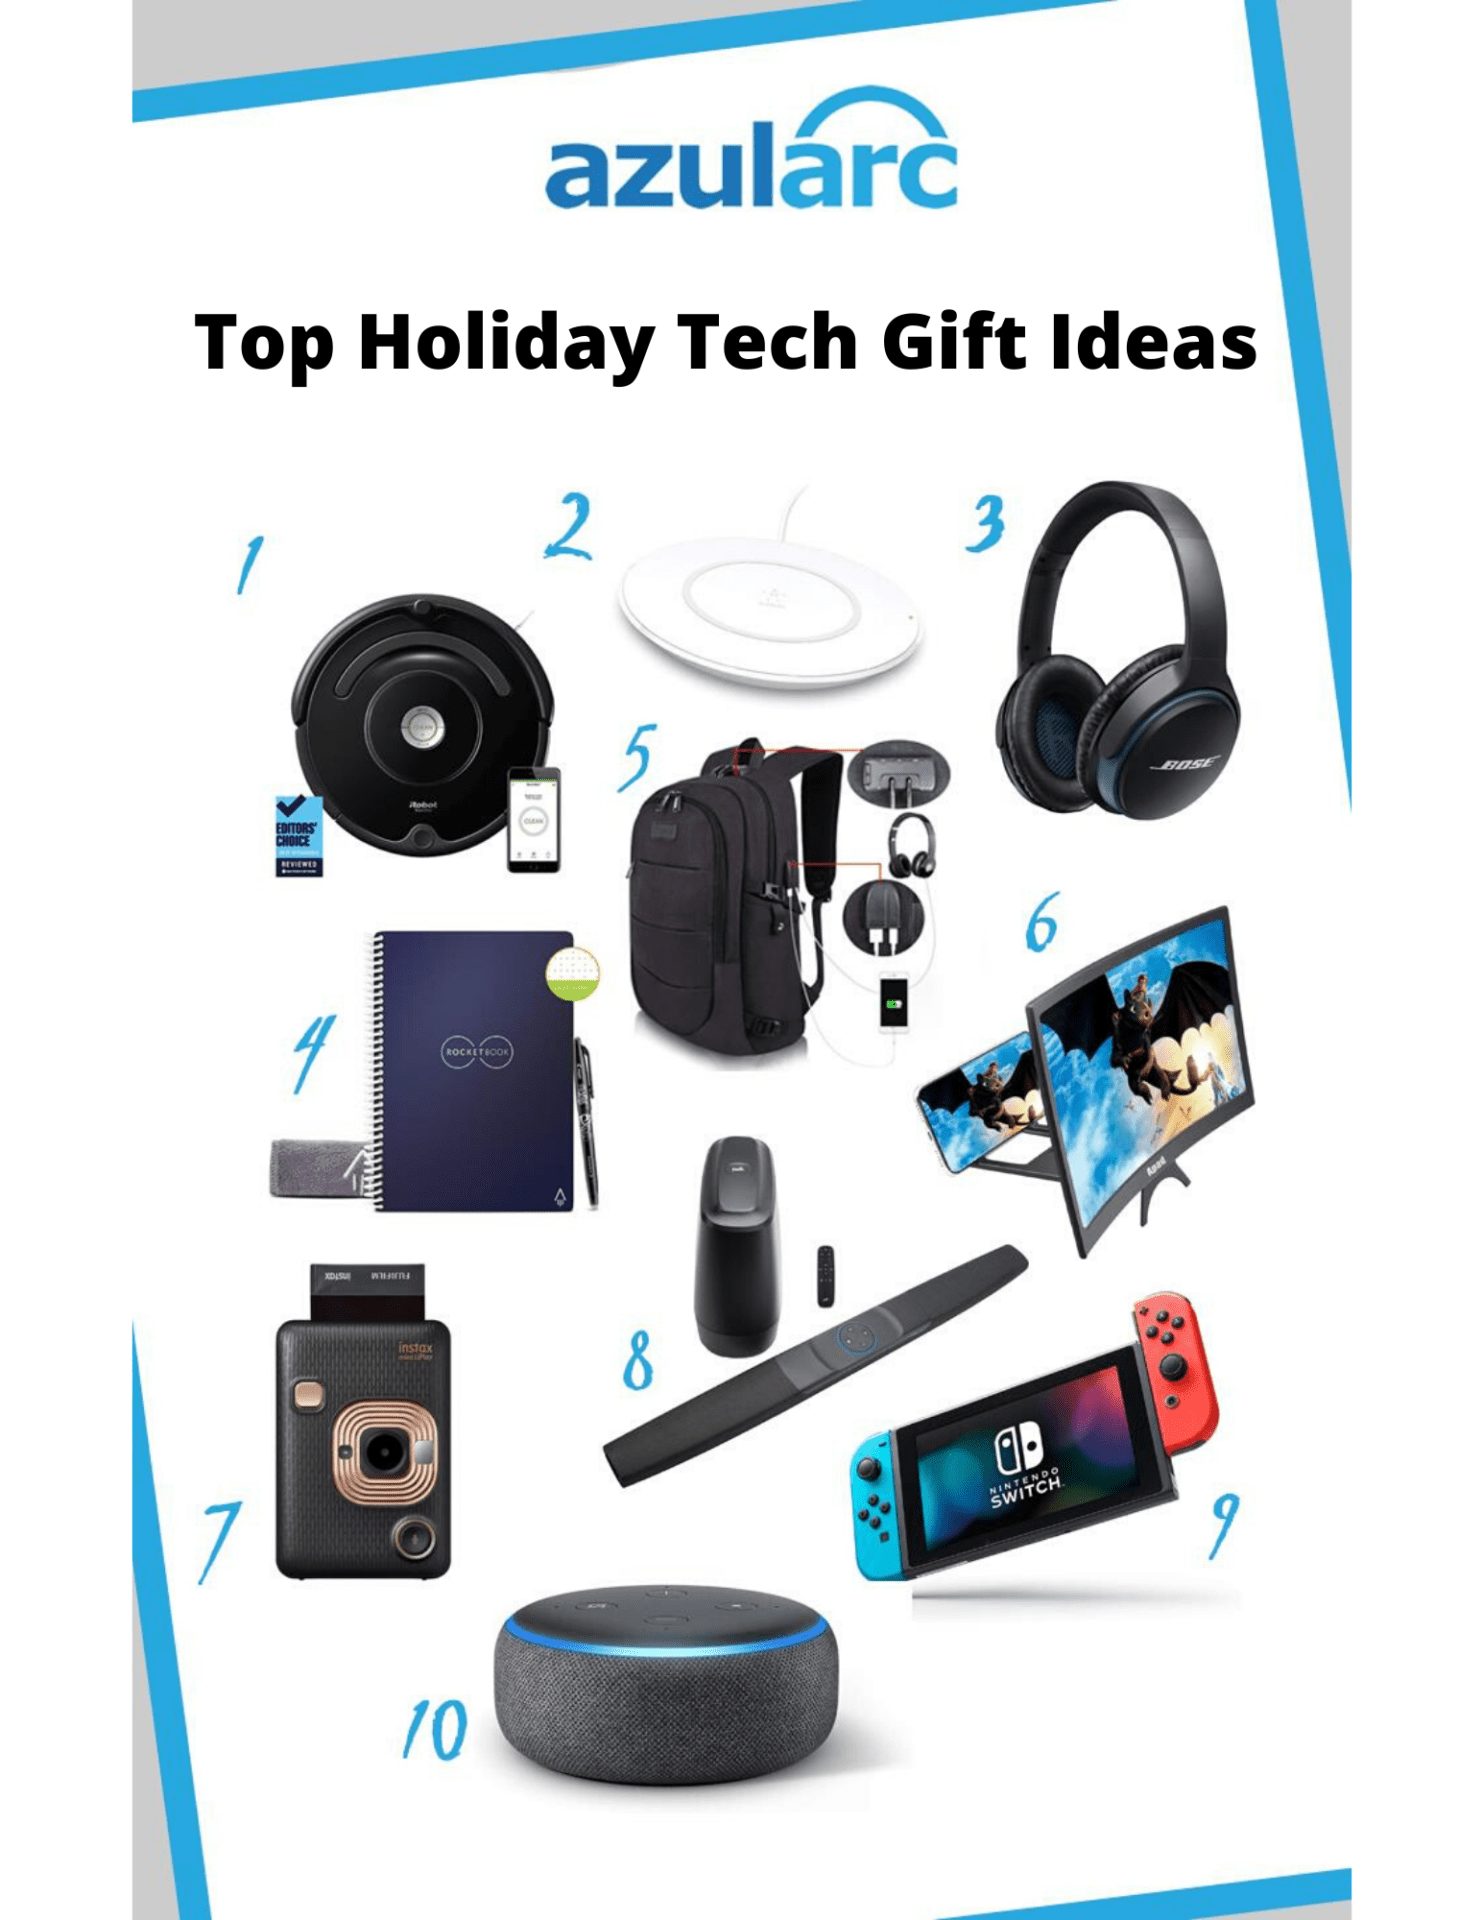 Top Holiday Tech Gift Ideas